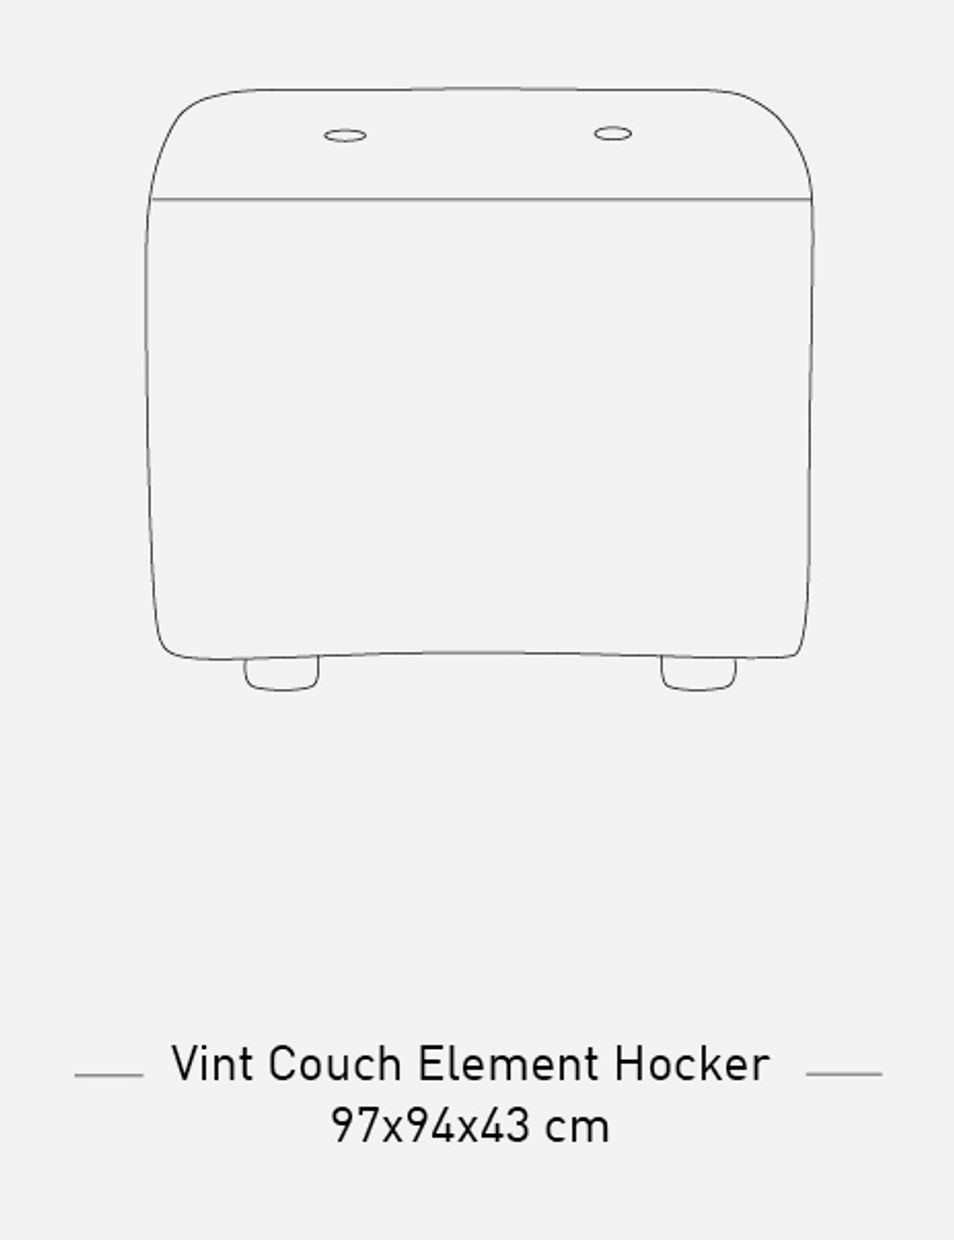 Vint couch: element hocker small, corduroy rib, brown